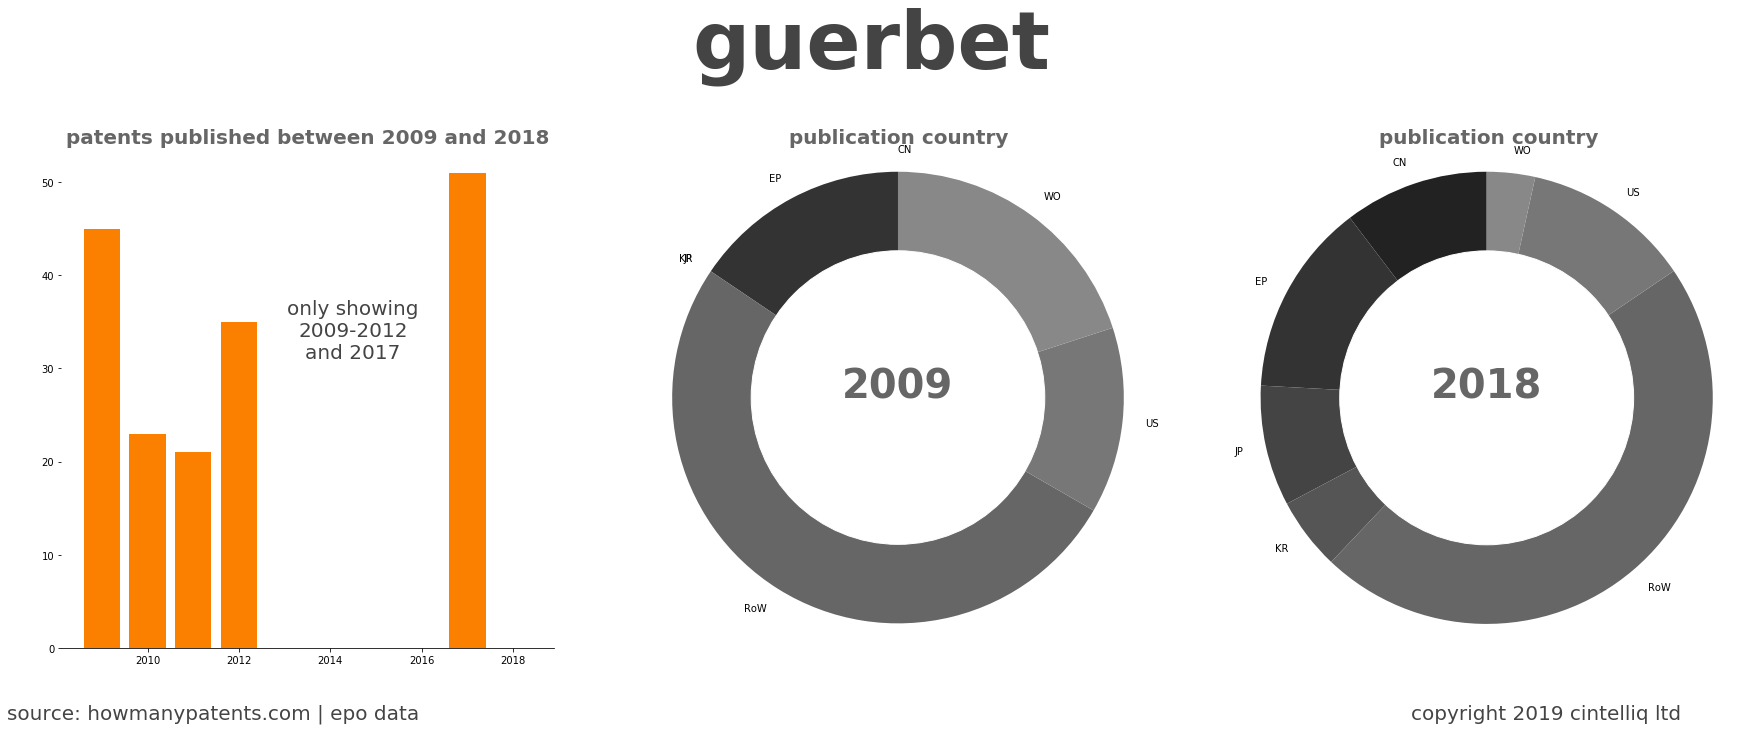 summary of patents for Guerbet